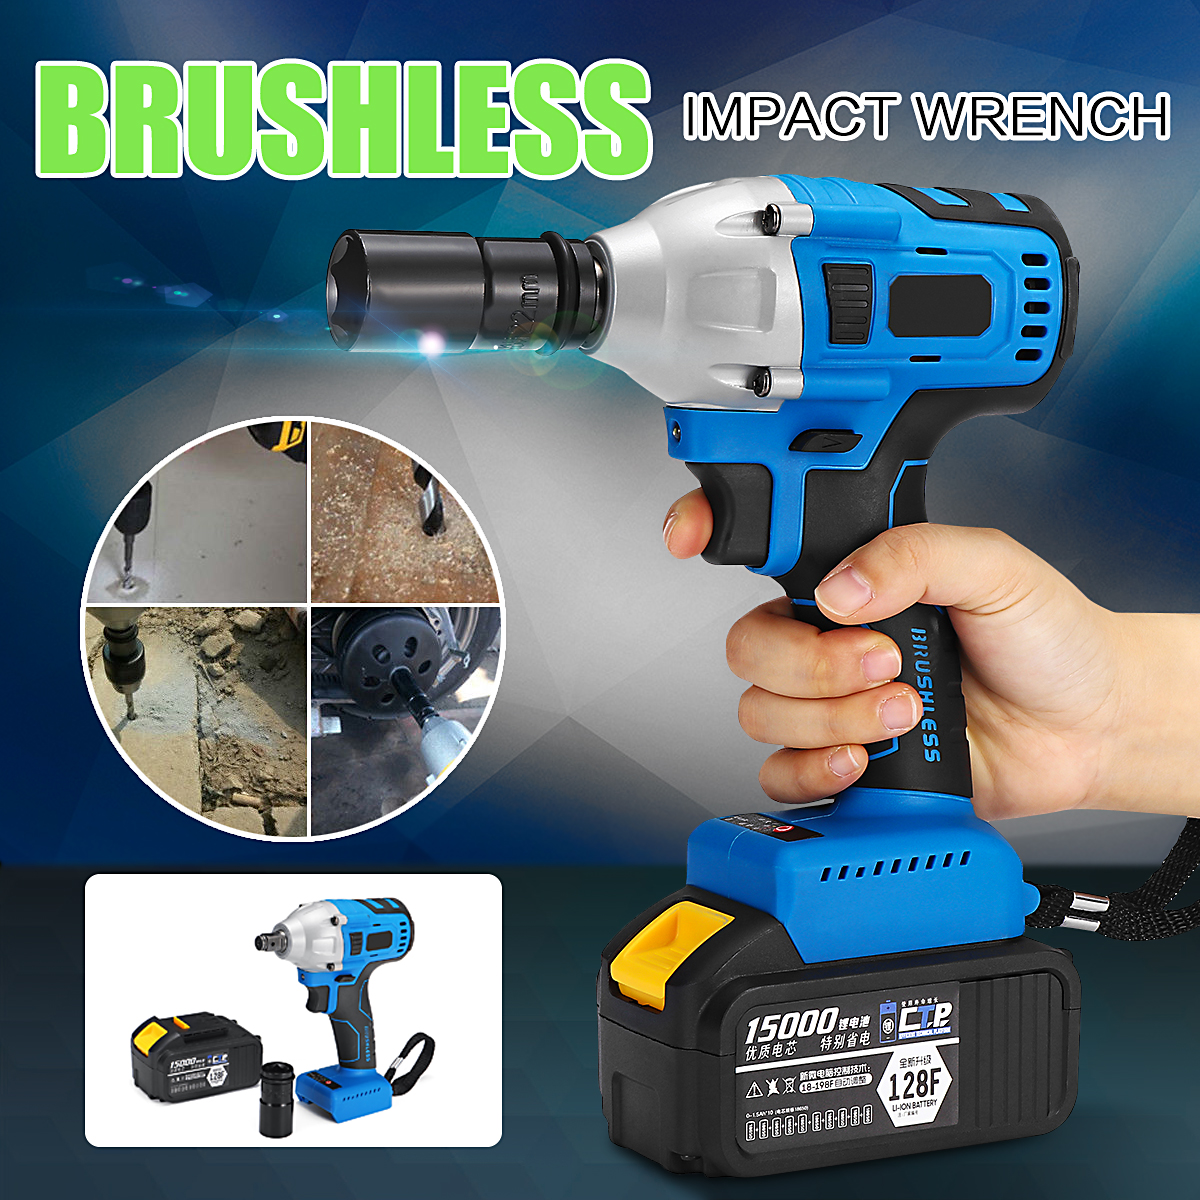 15000-30000mAH-Cordless-Impact-Wrench-Brushless-Electric-Wrench-12-Socket-Tool-1369004-1